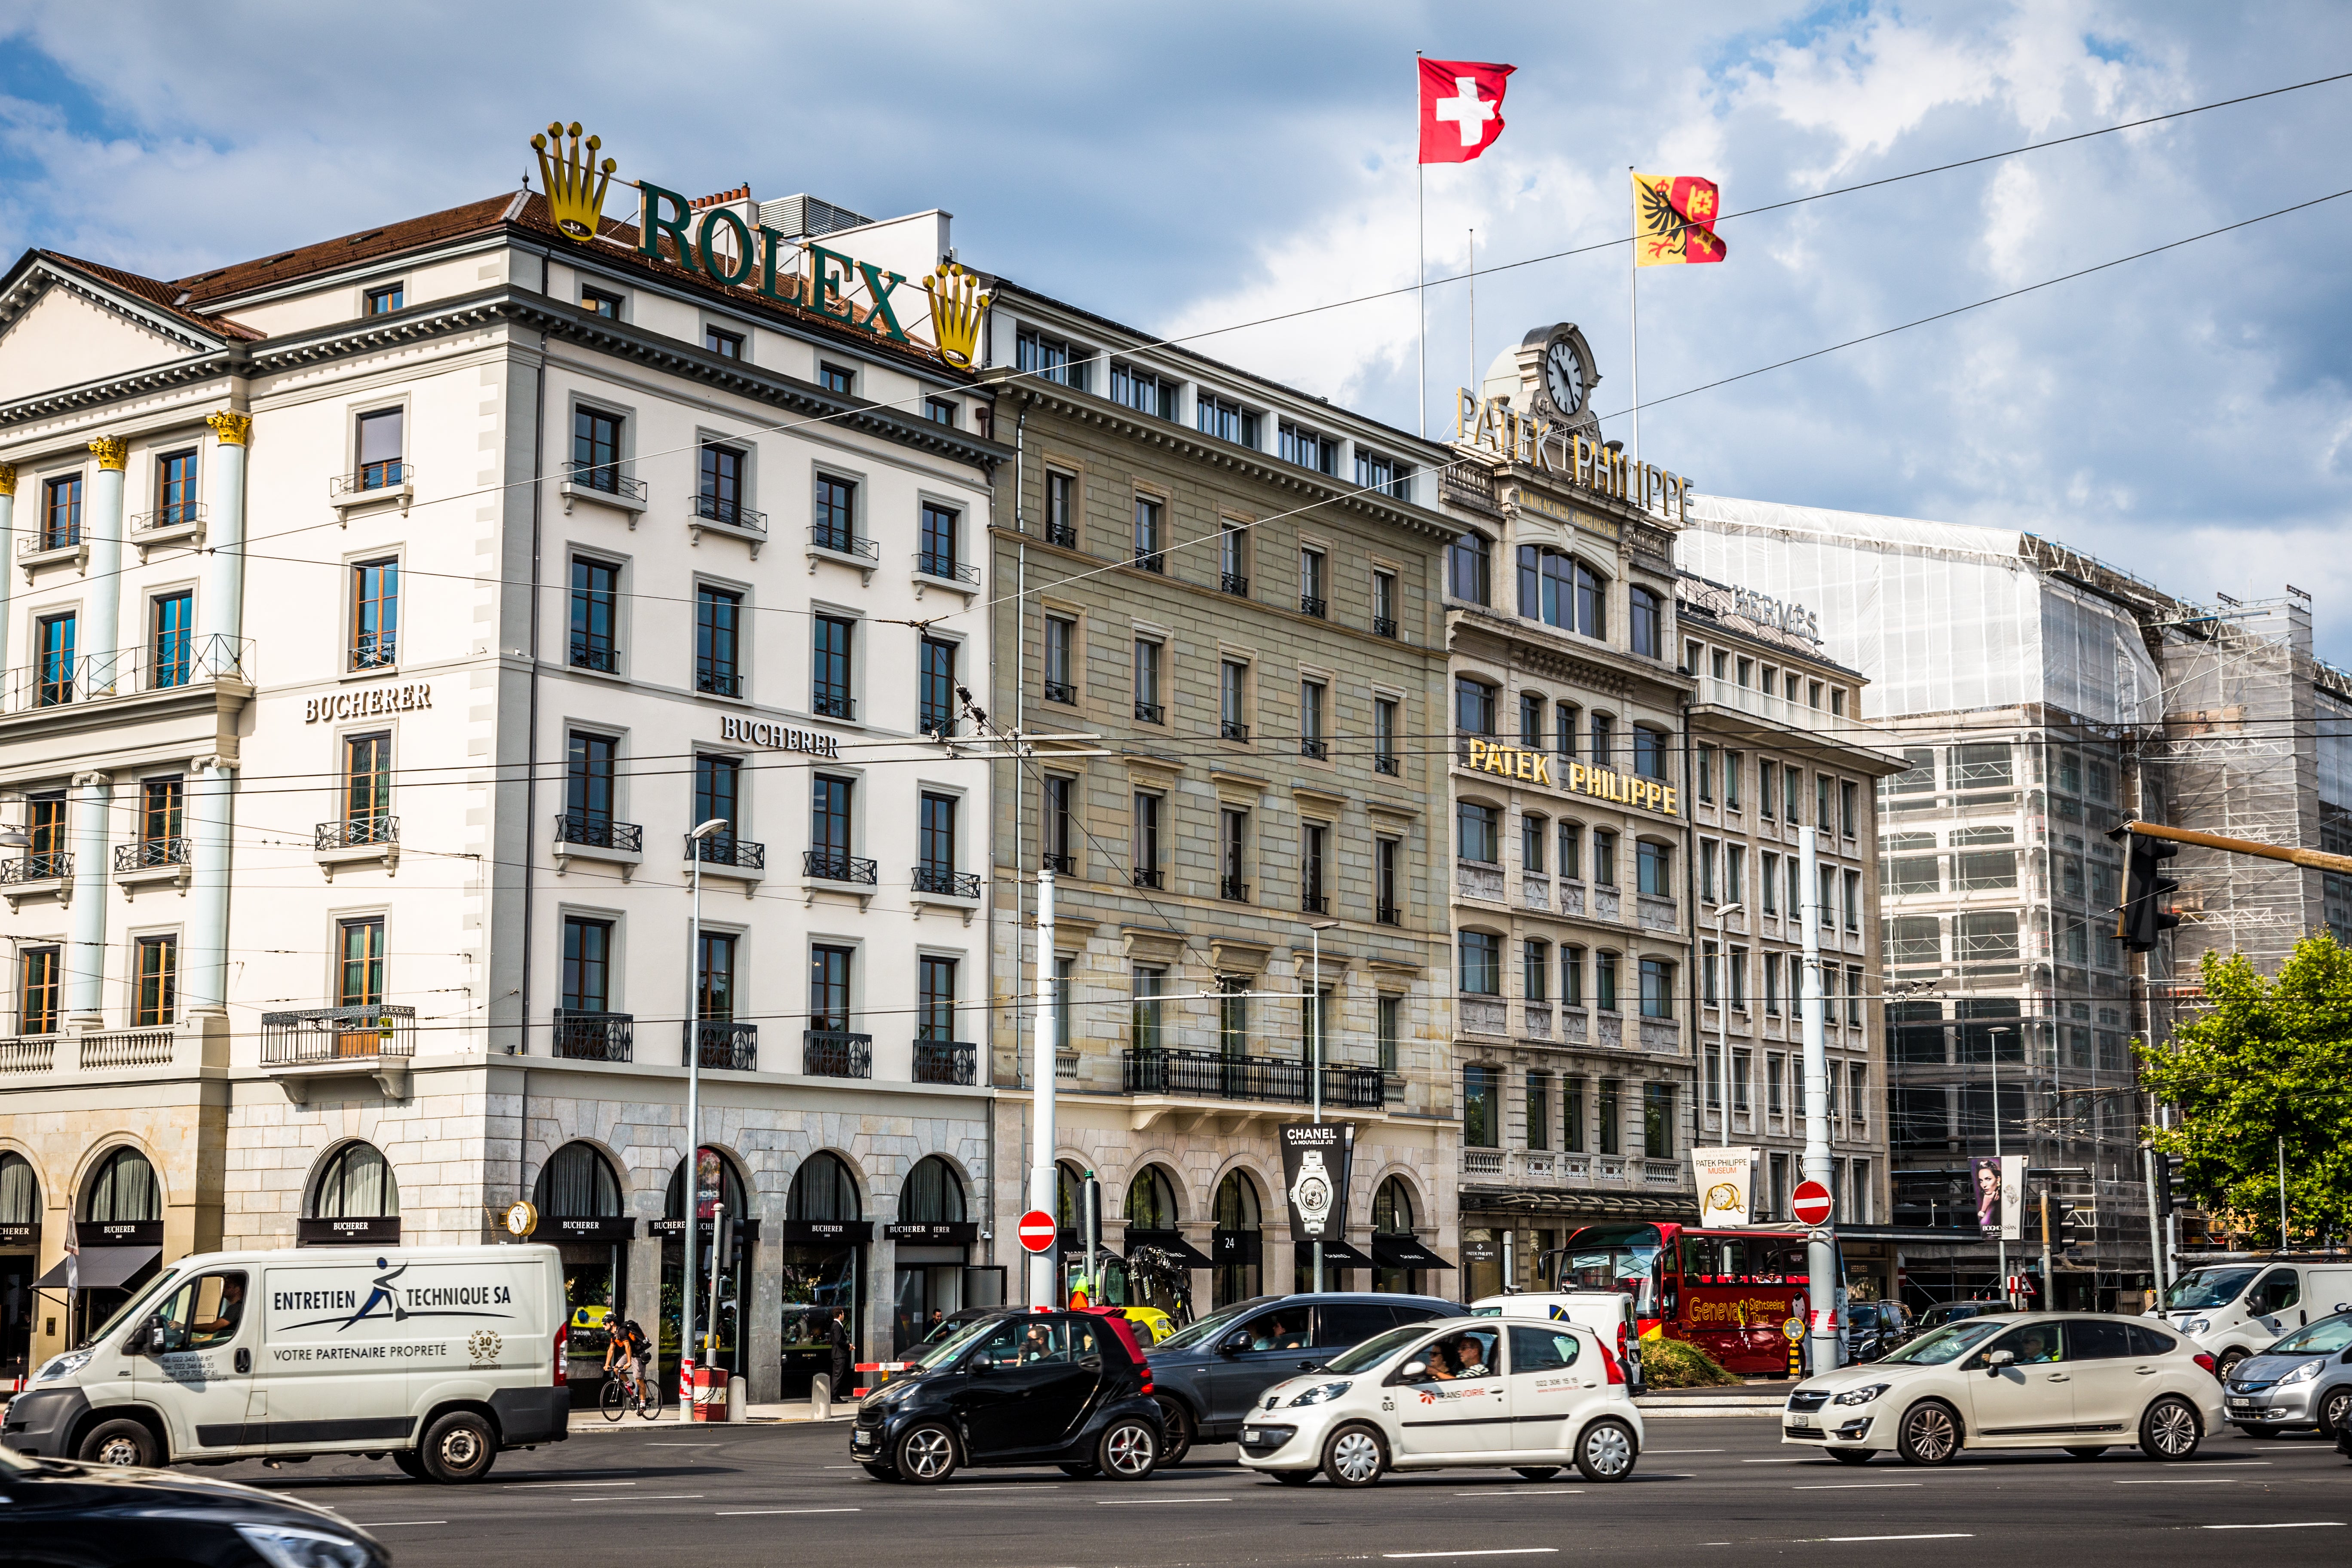 Geneva's streets are lined with luxury shops